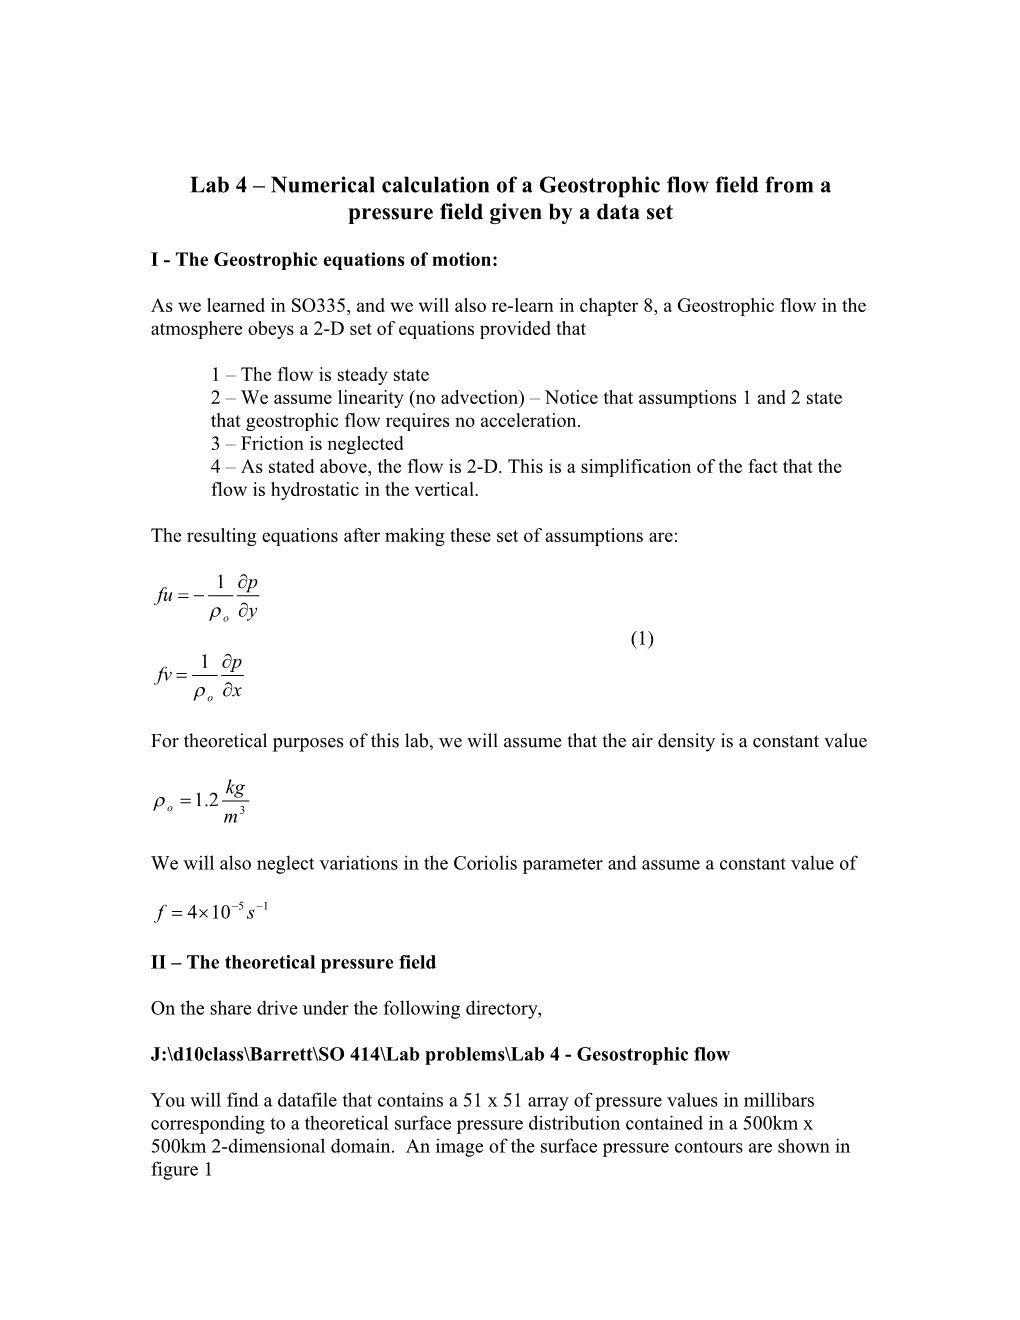 I - the Geostrophic Equations of Motion